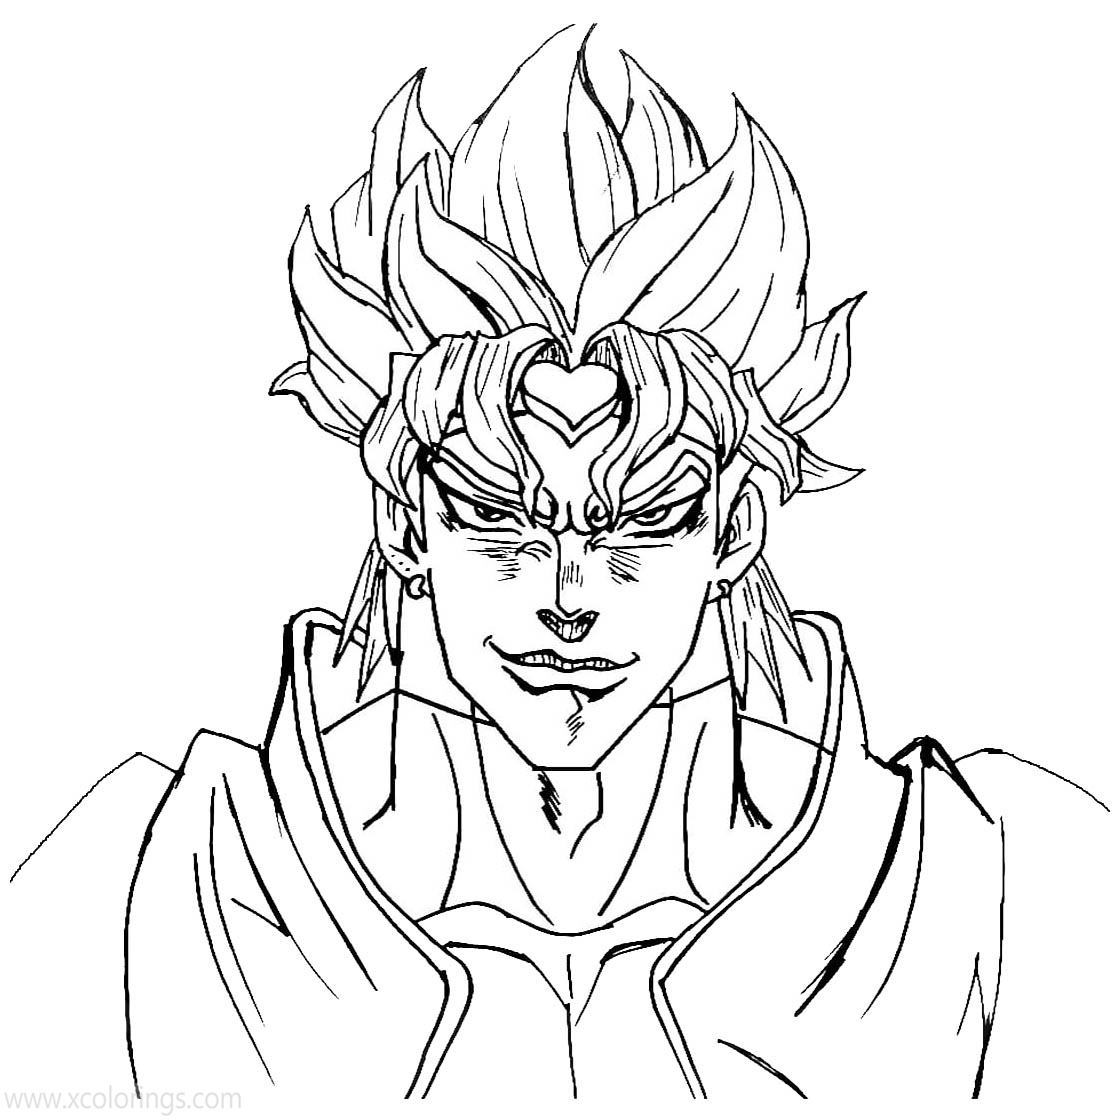 Free Dio from JoJo's Bizarre Adventure Coloring Pages printable